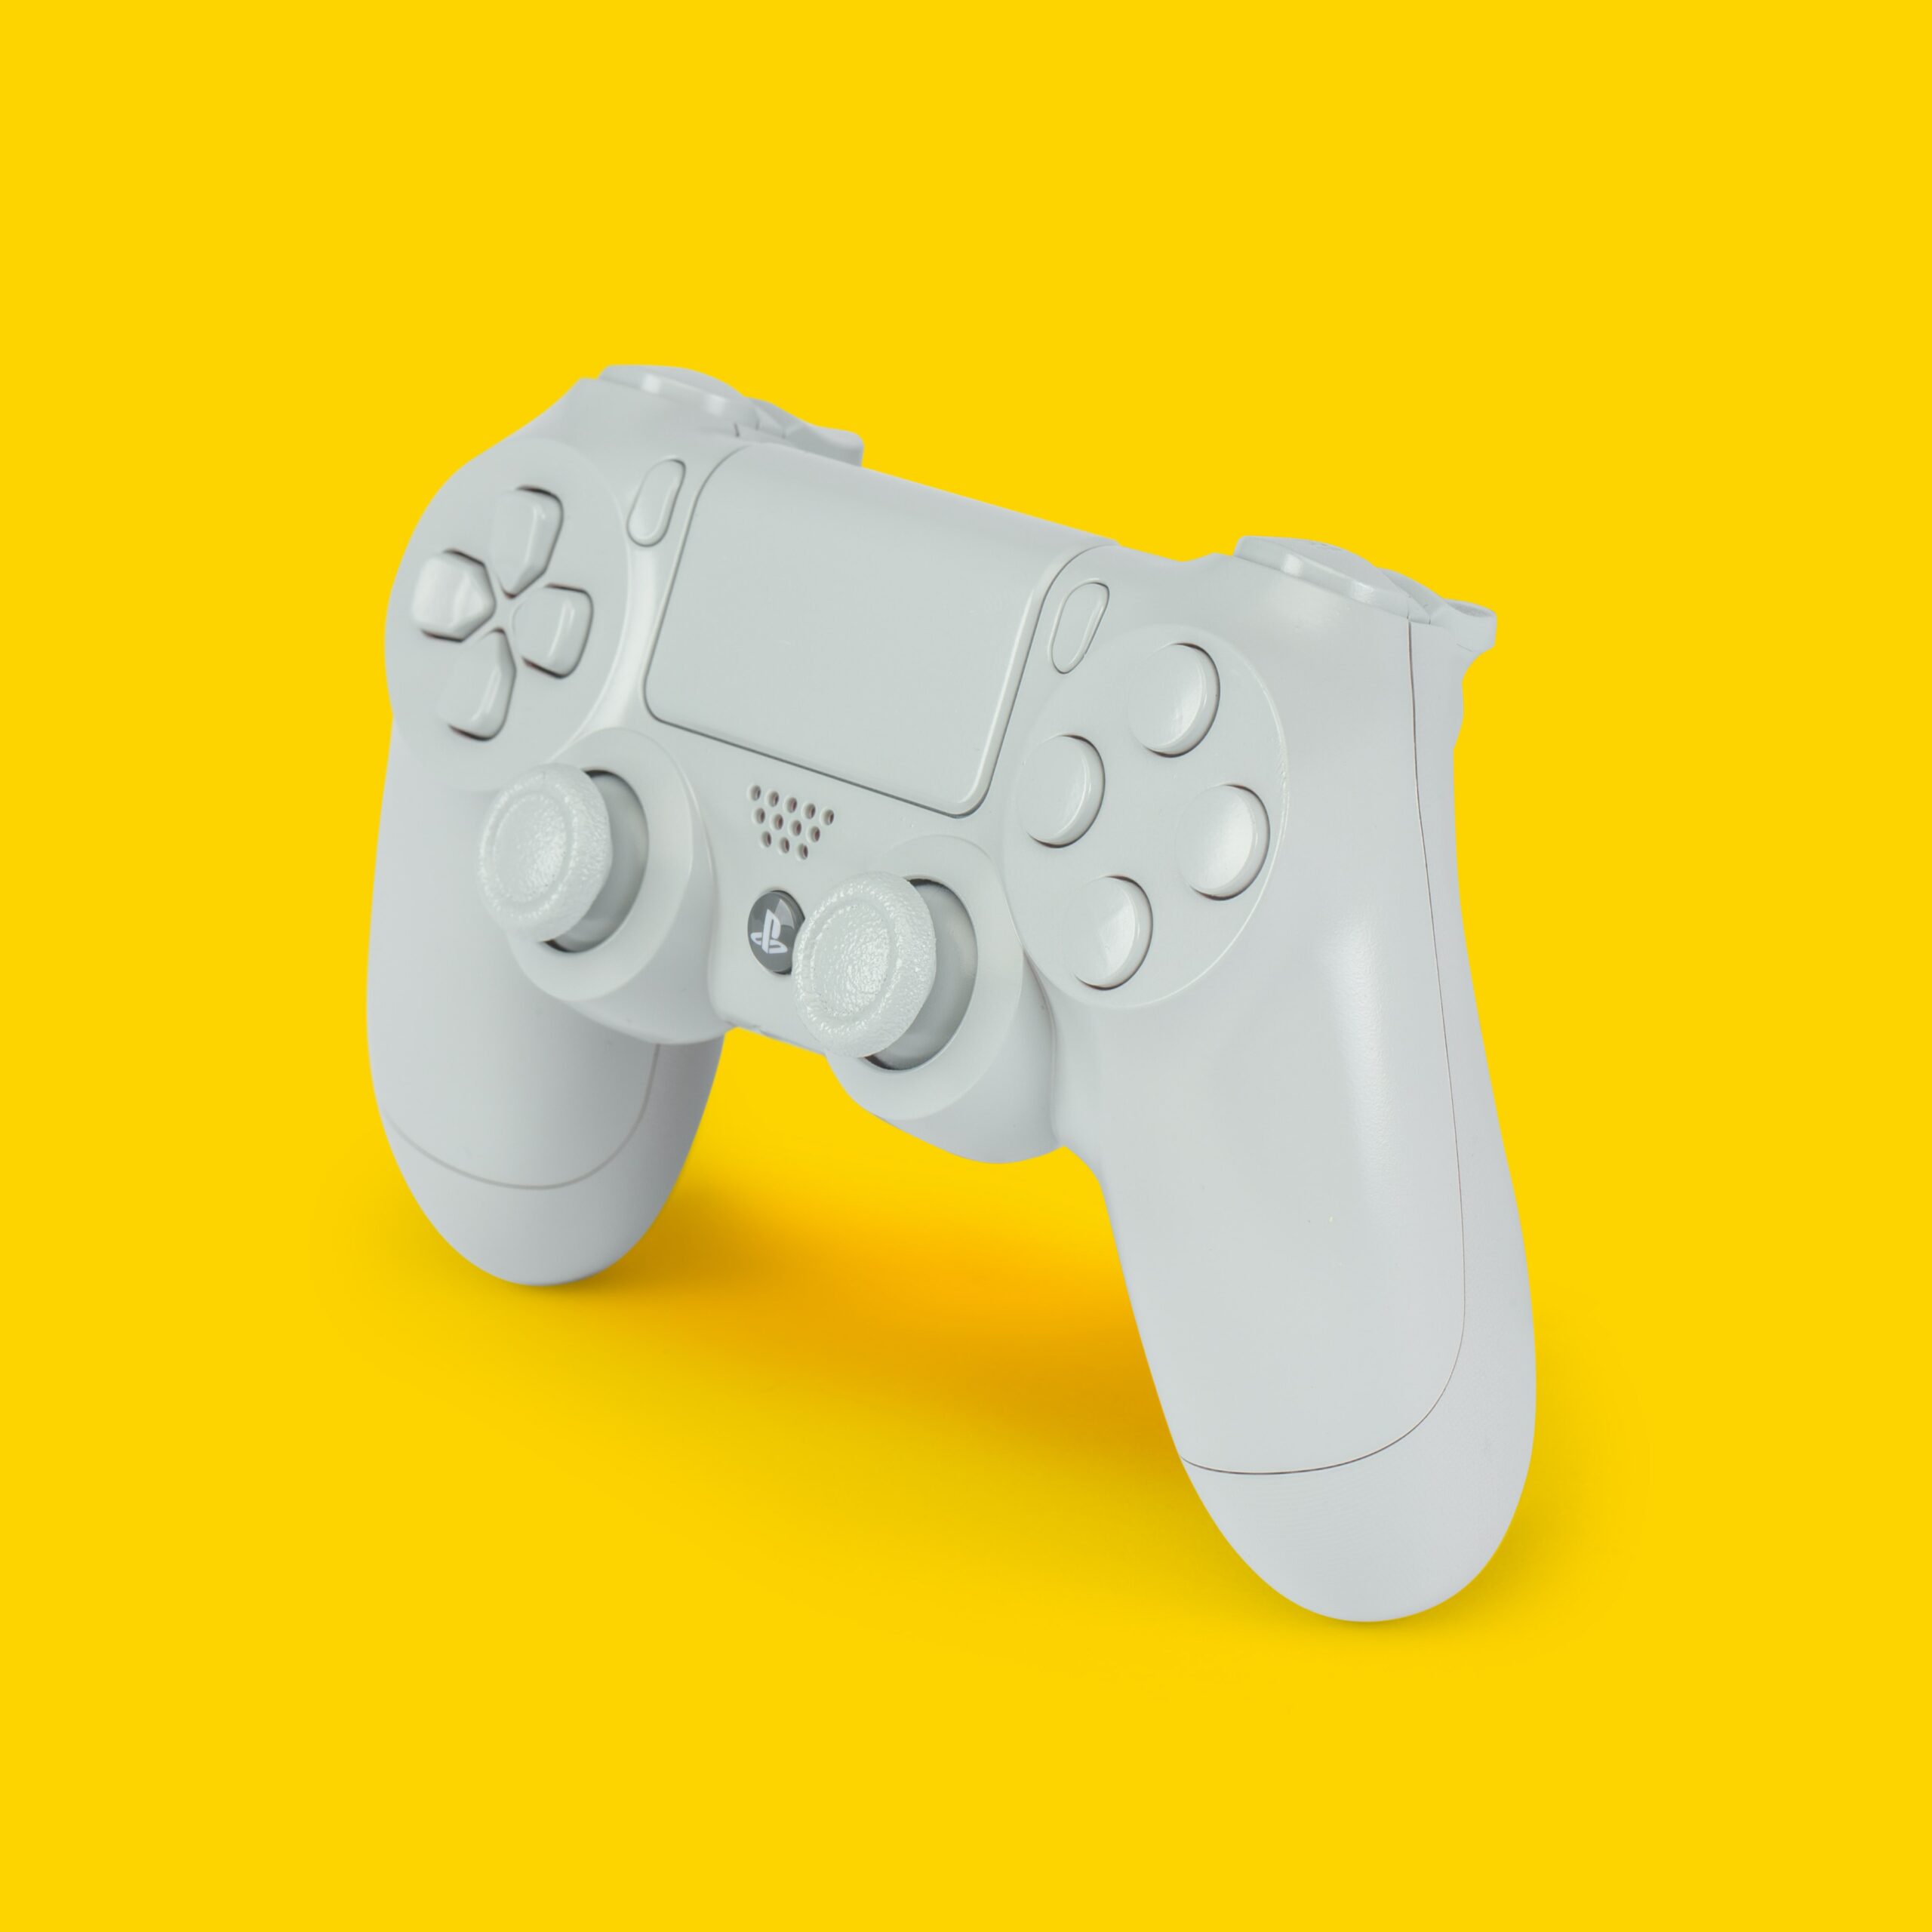 White gamepad located on a yellow background